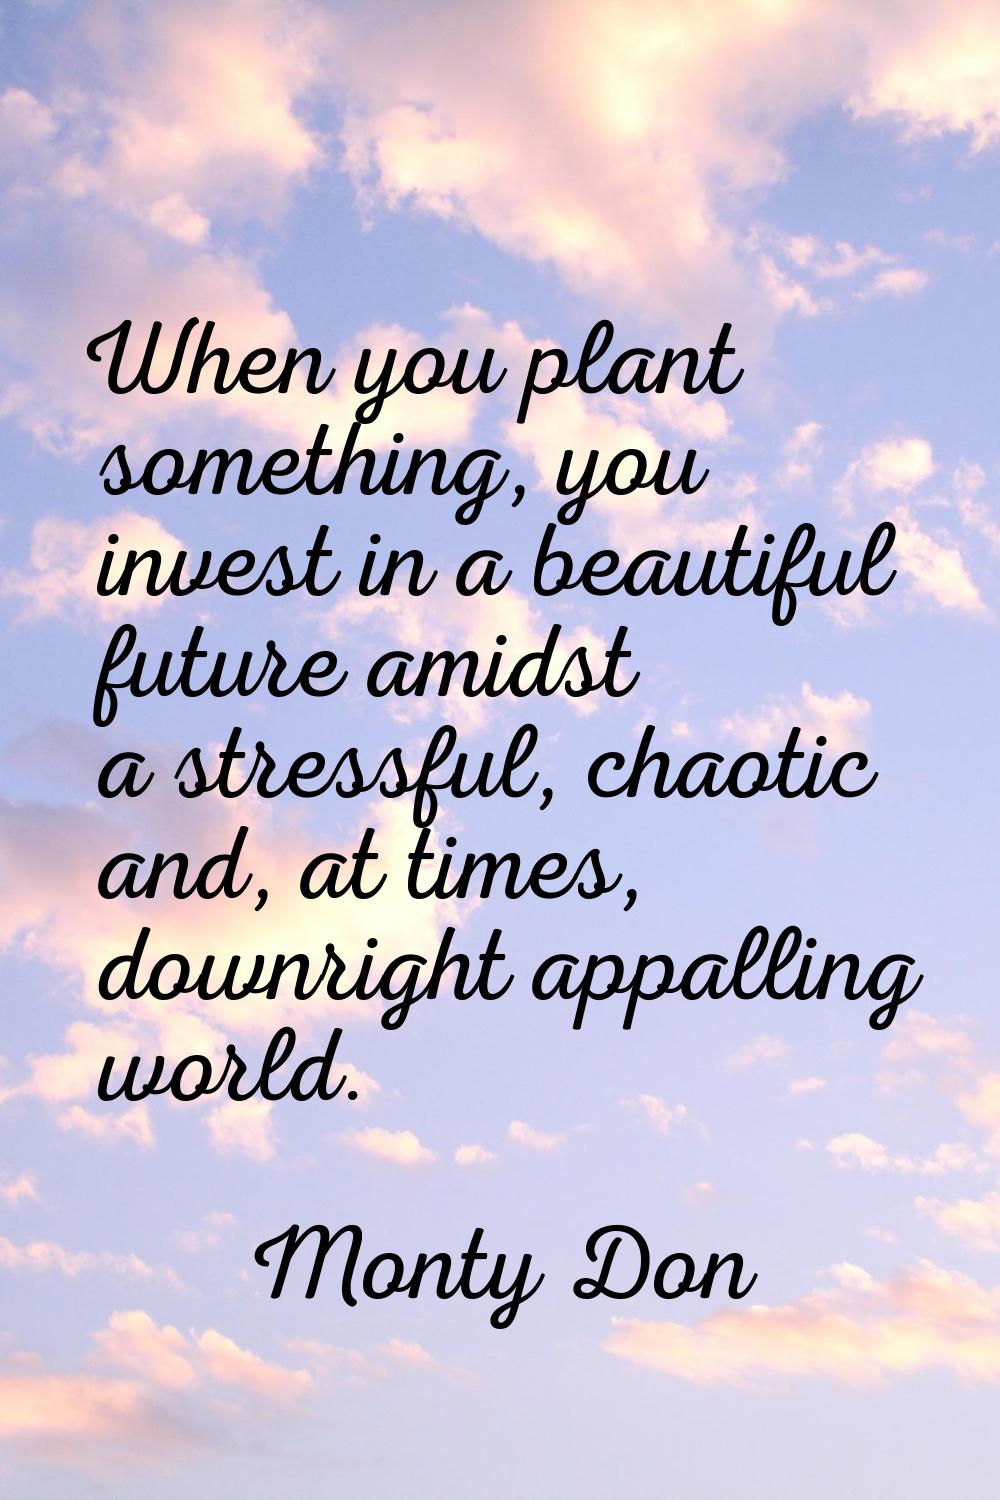 When you plant something, you invest in a beautiful future amidst a stressful, chaotic and, at time